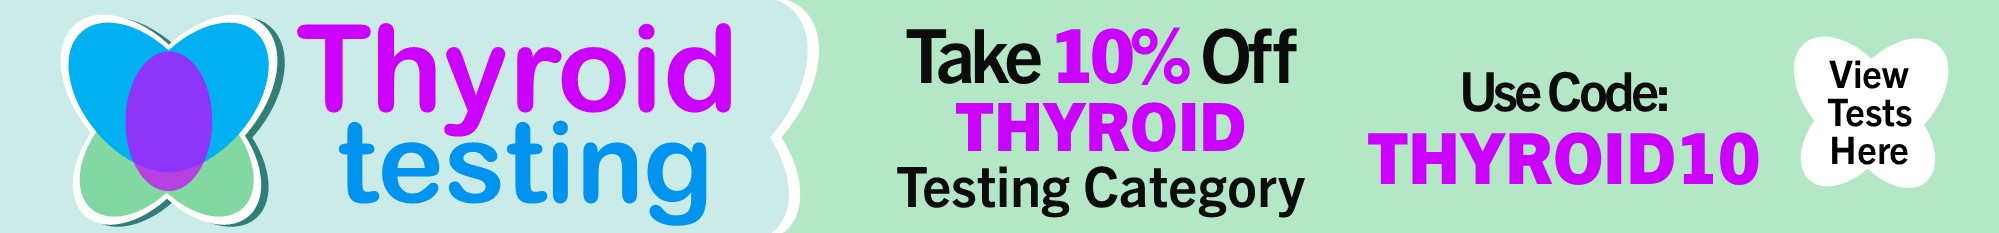 March Promotion Thyroid Test Category 10% Off Promo Code THYROID10